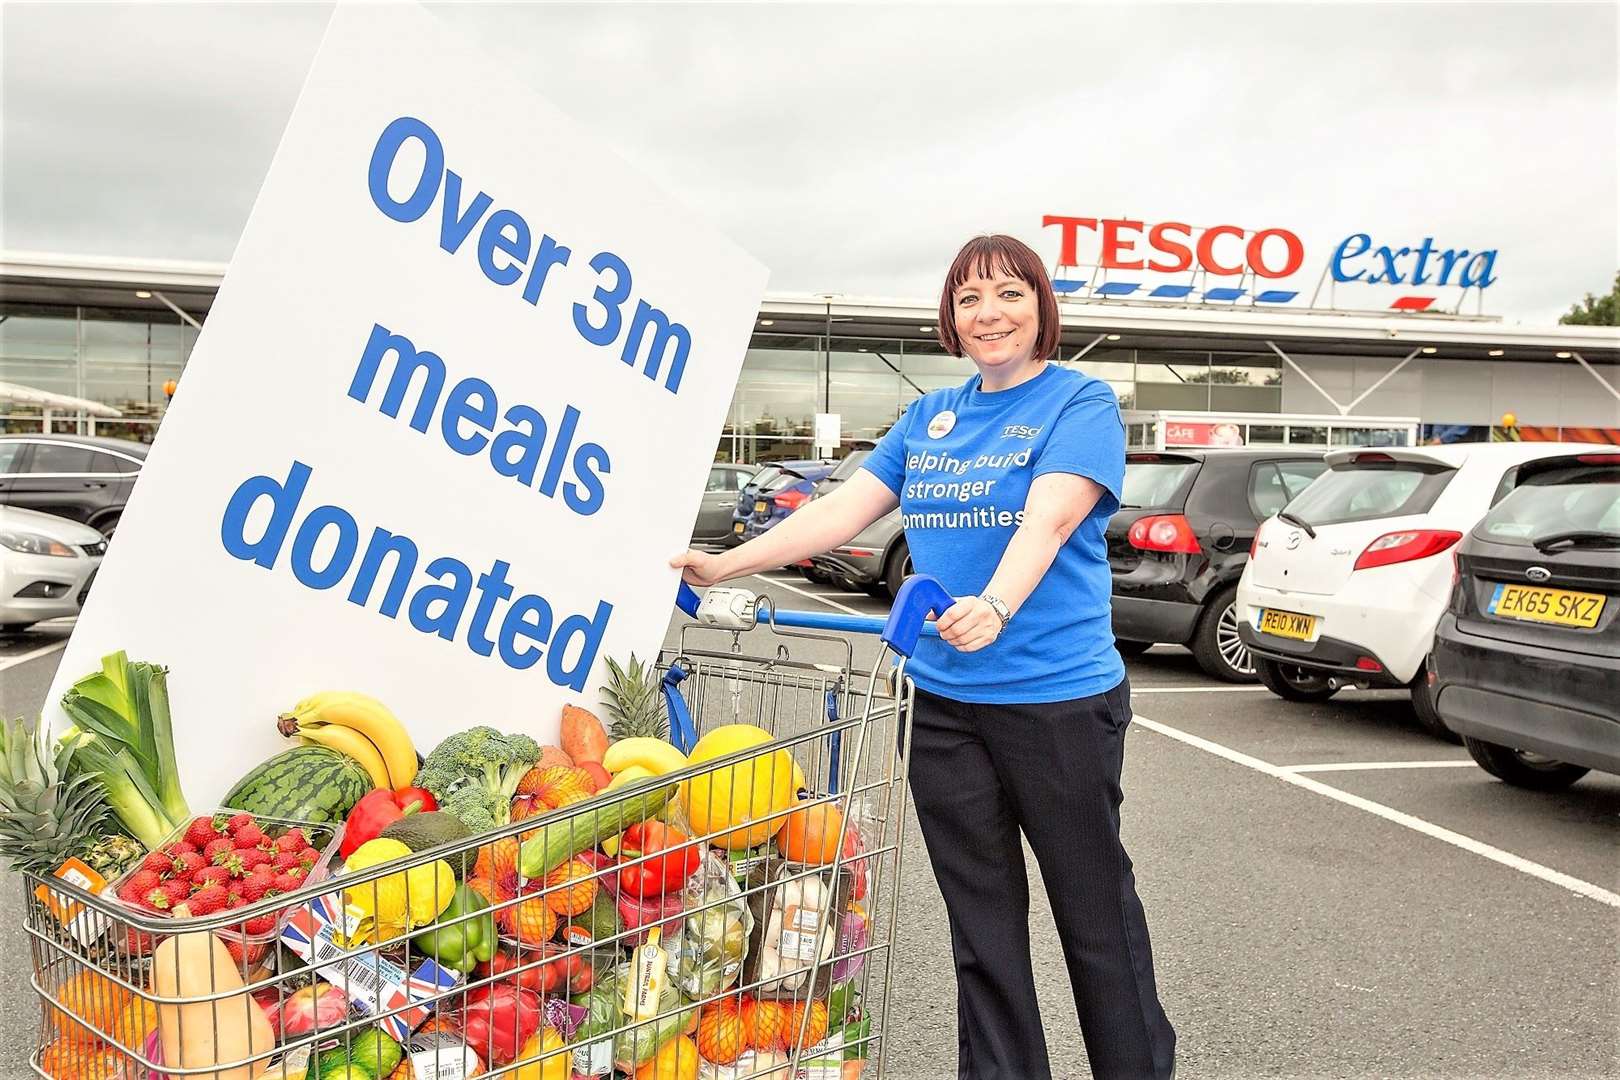 Tesco has been spearheading a campaign to provide free meals.